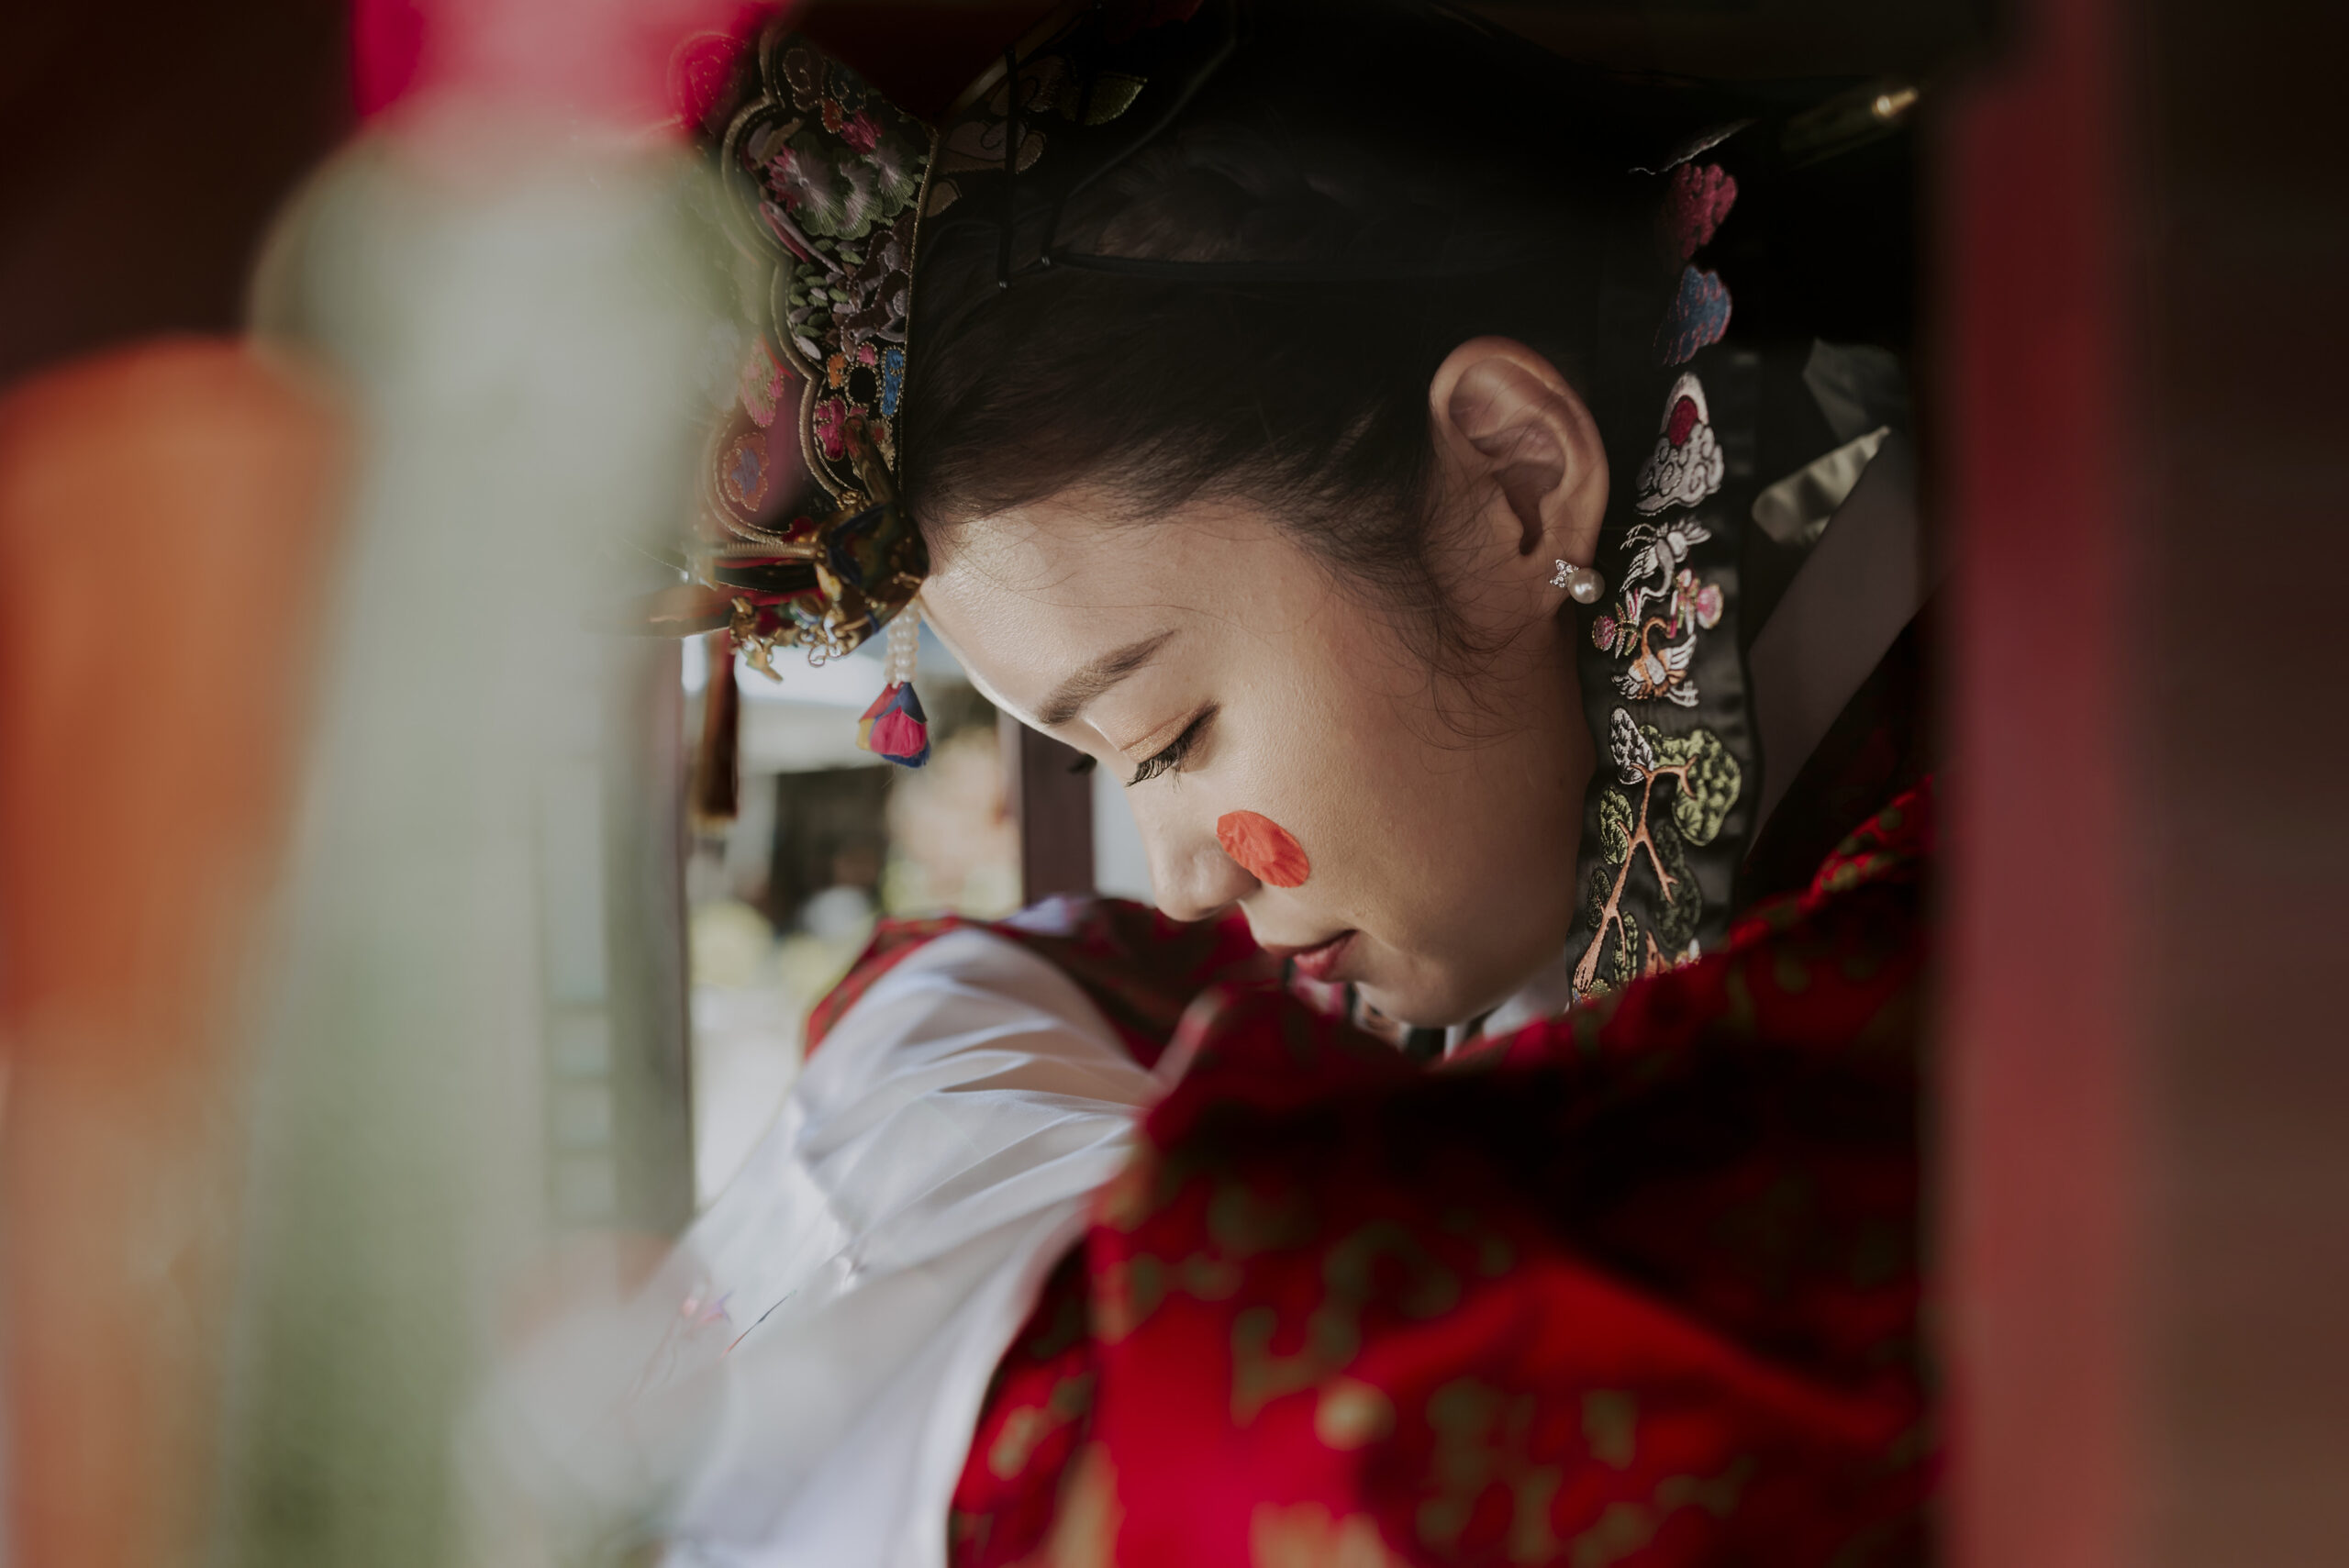 A woman in a traditional Asian dress is looking out of a window, showcasing elements of traditional attire.